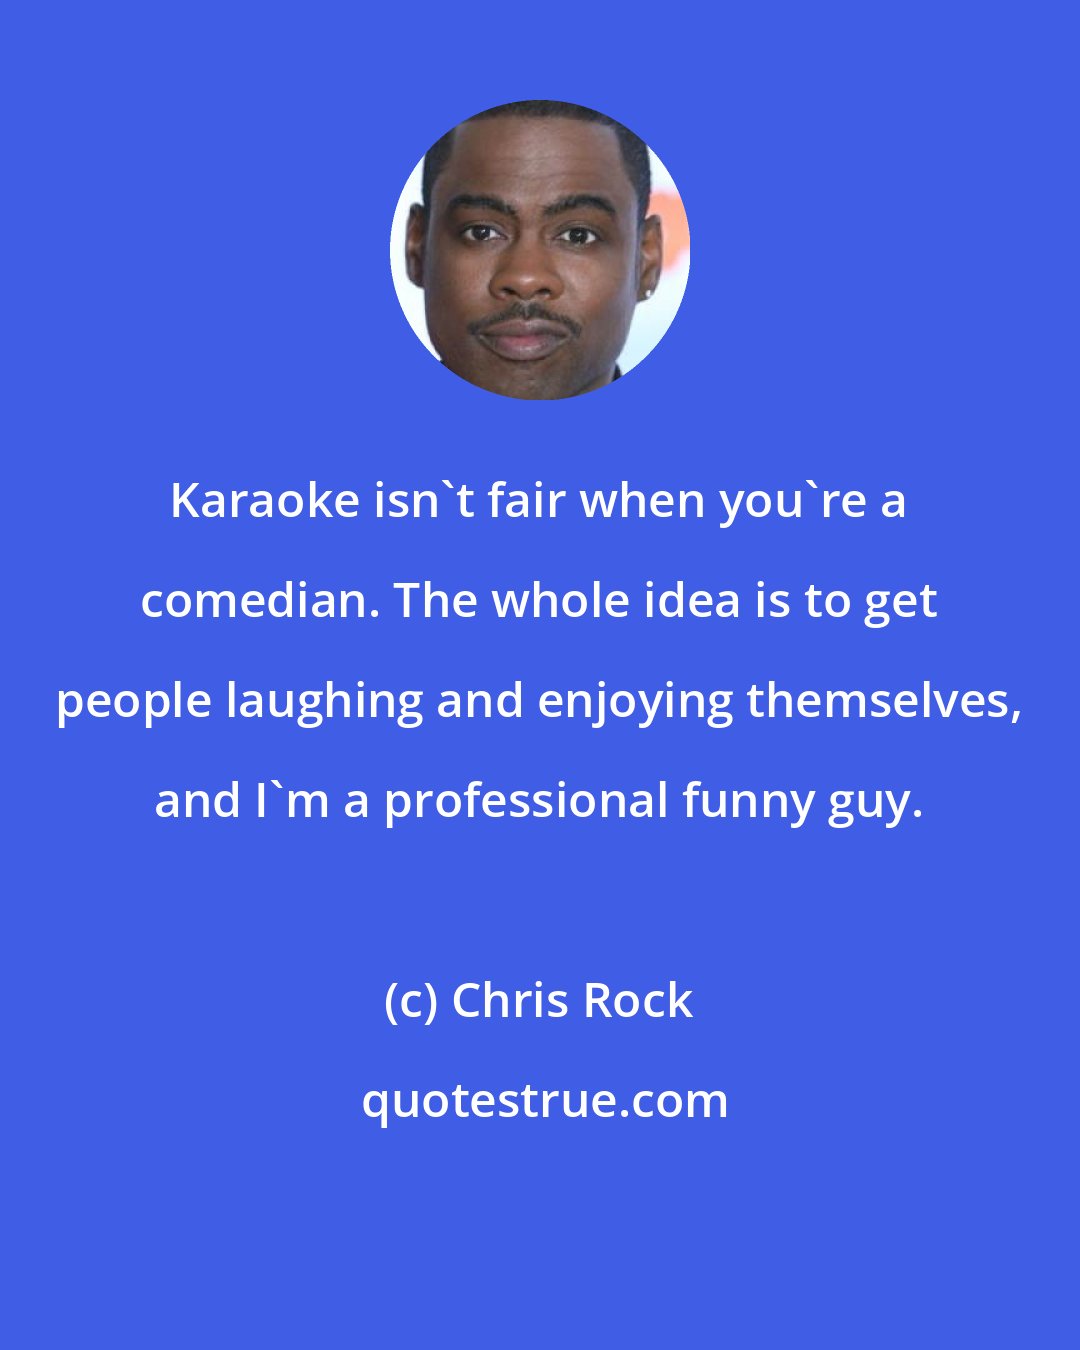 Chris Rock: Karaoke isn't fair when you're a comedian. The whole idea is to get people laughing and enjoying themselves, and I'm a professional funny guy.